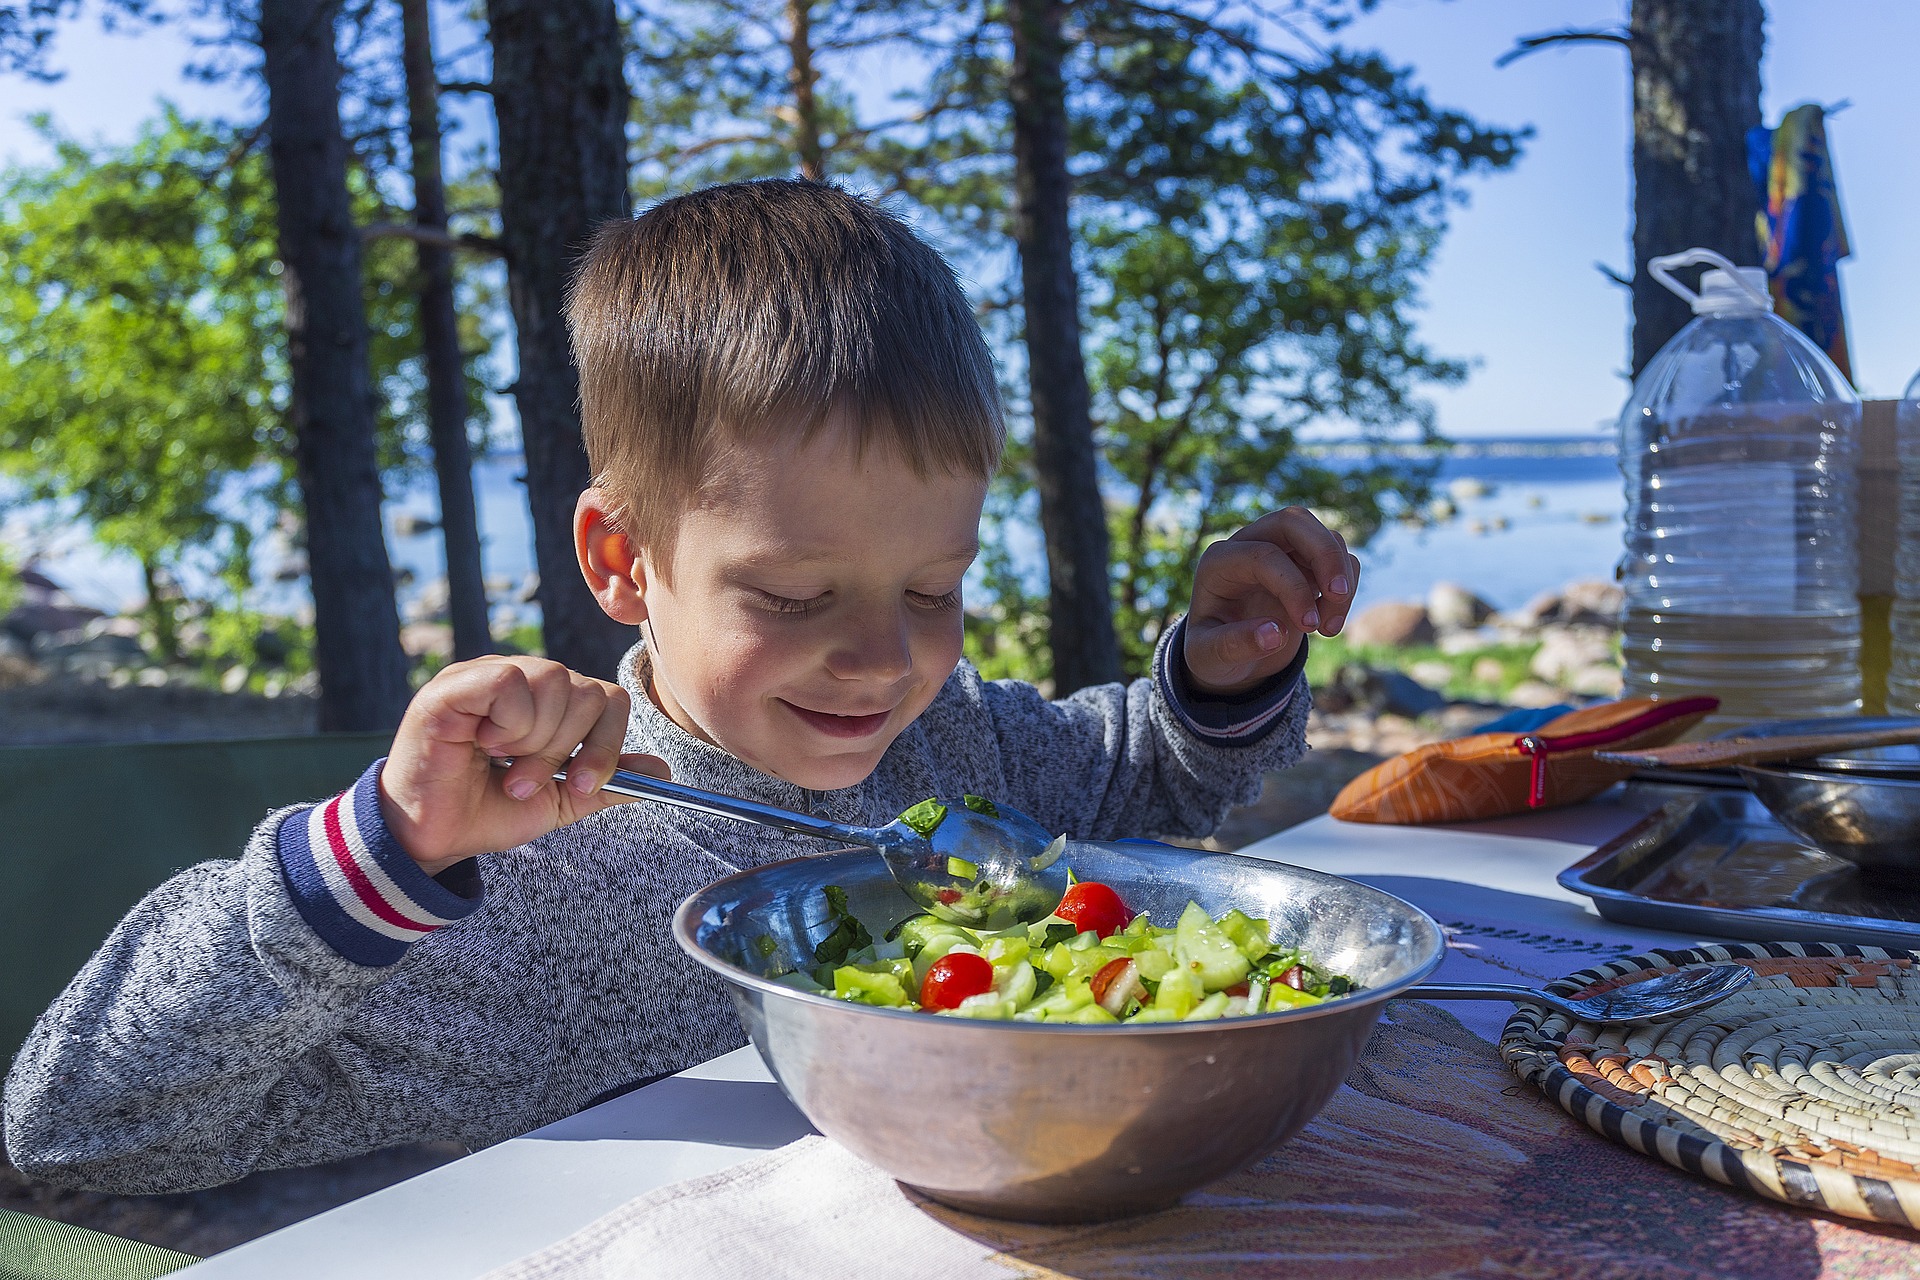 5 Easy Ways to Get Kids to Eat Vegetables